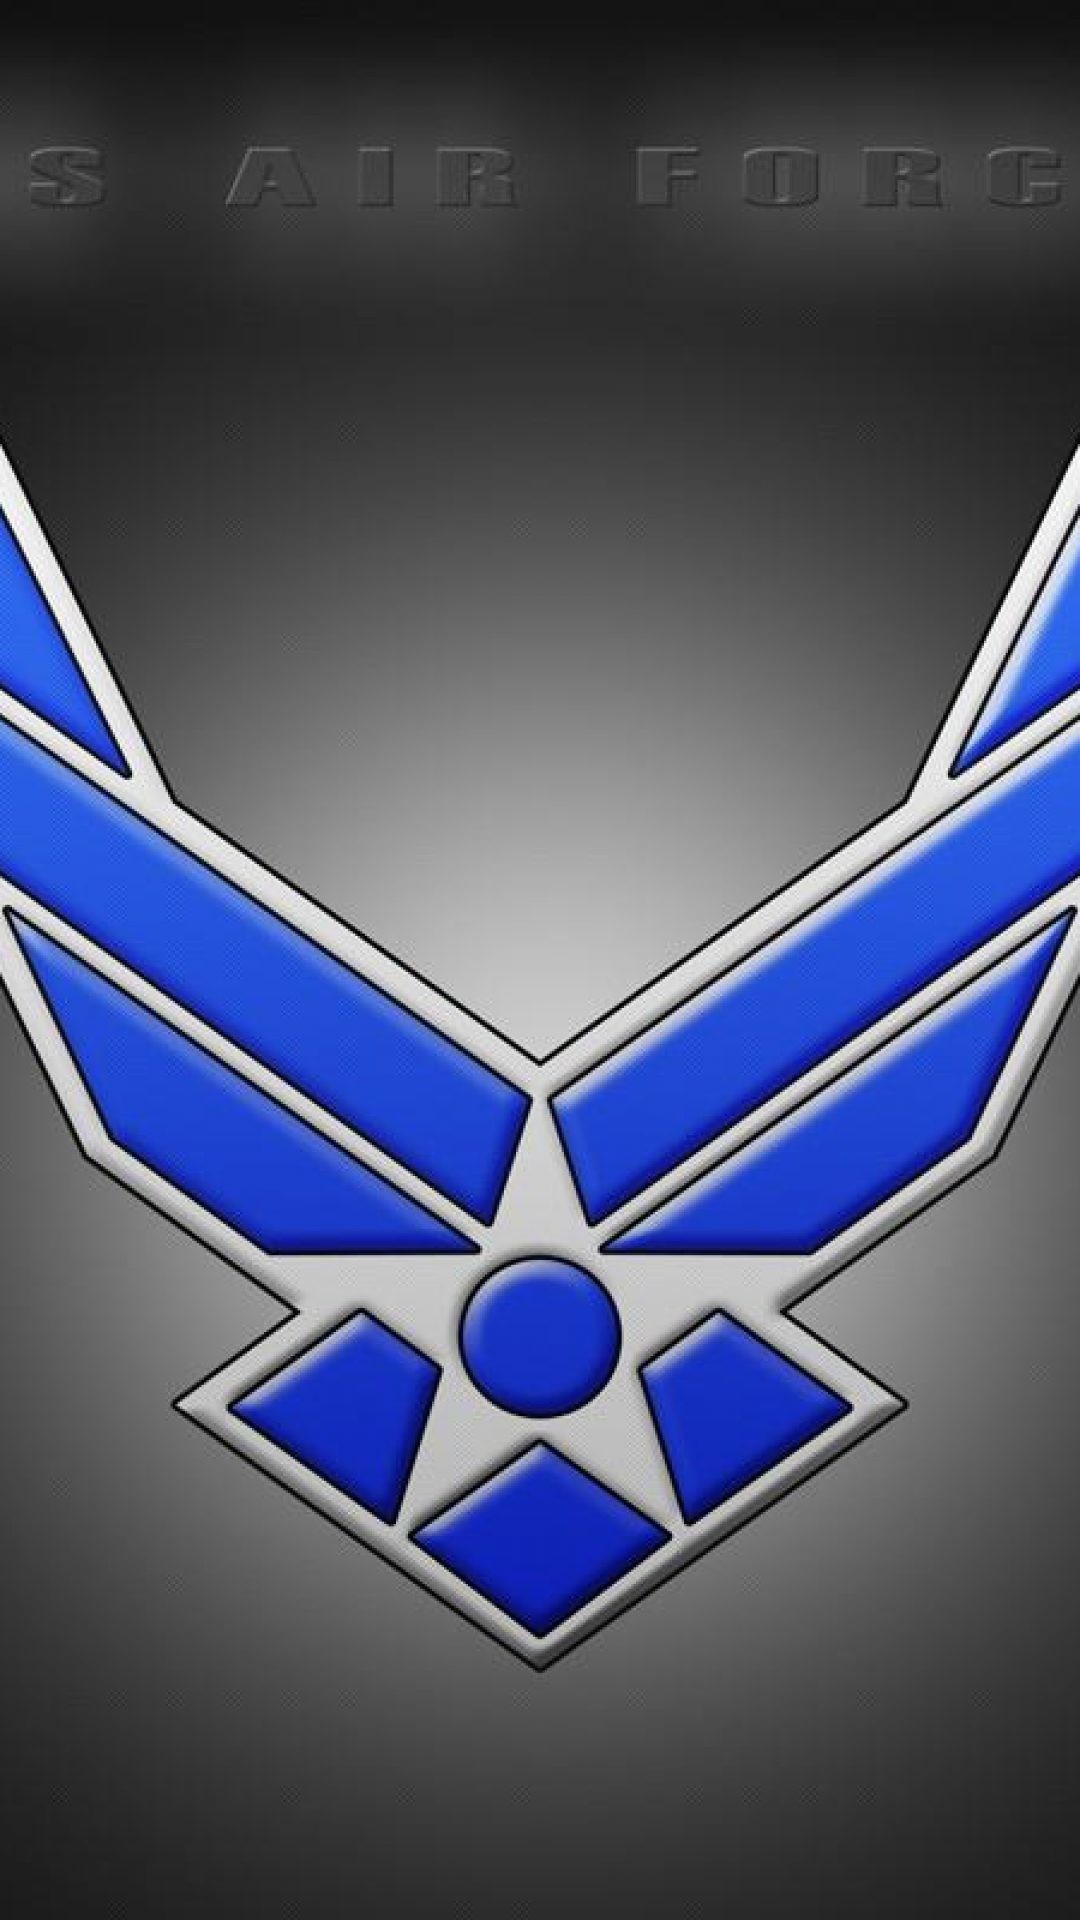 Air Force Wallpaper for iPhone (64+ images)
 Usaf Logo Wallpaper Hd